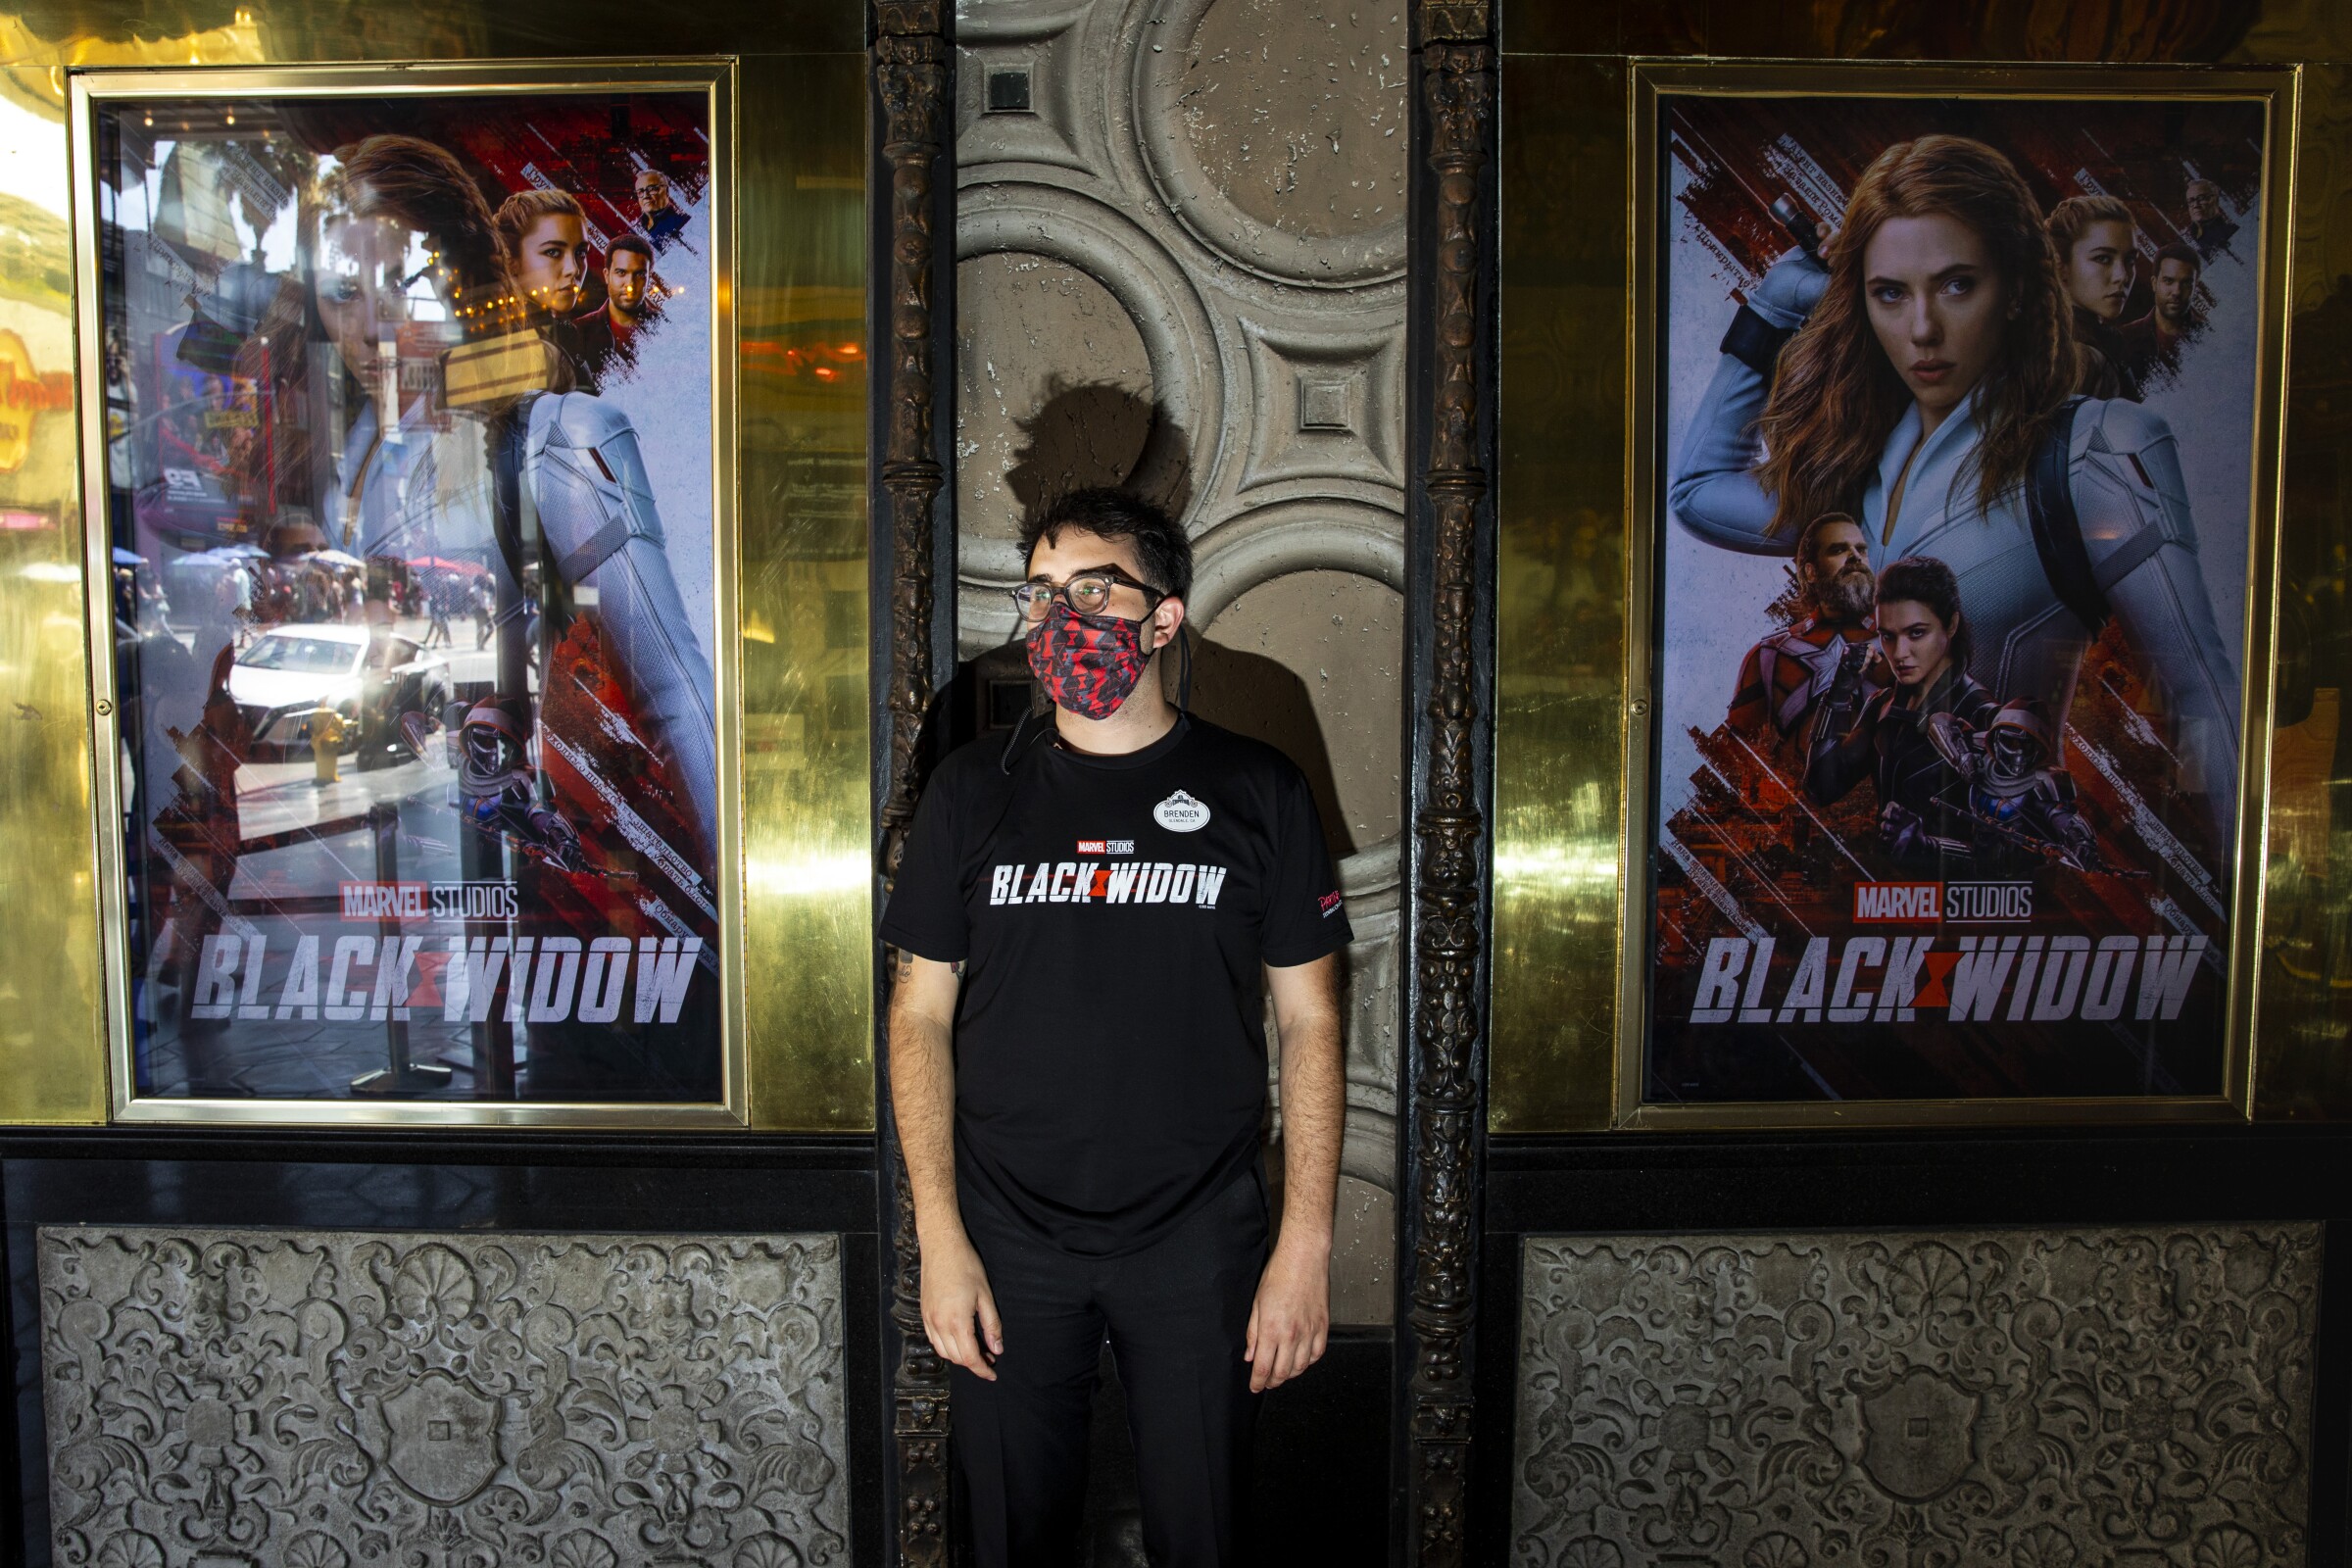 A masked young man stands between two movie posters